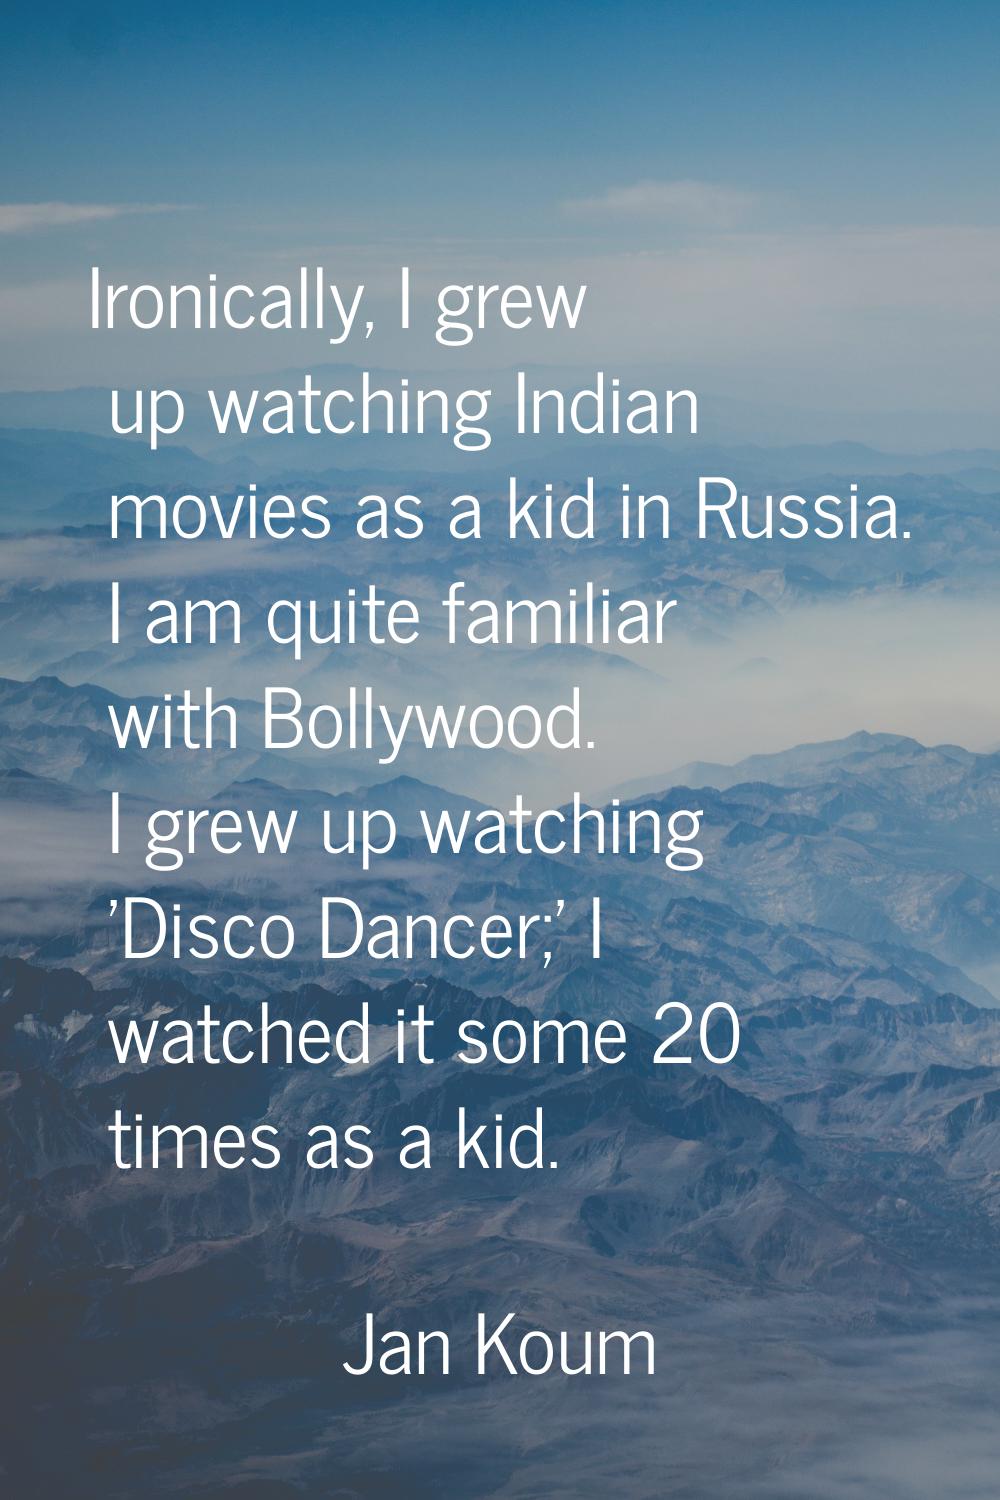 Ironically, I grew up watching Indian movies as a kid in Russia. I am quite familiar with Bollywood